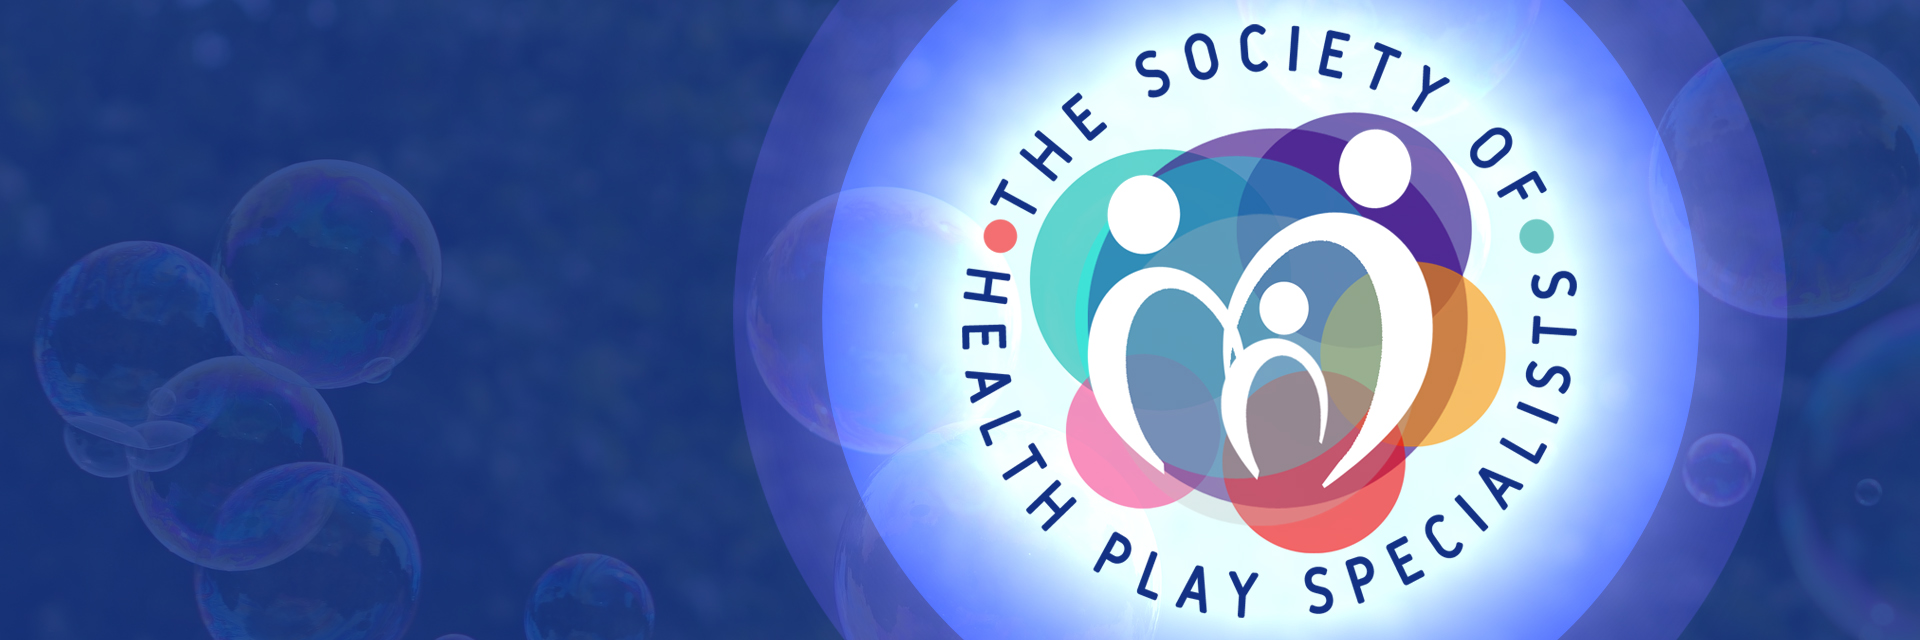 SOCIETY OF HEALTH PLAY SPECIALISTS (SOHPS)